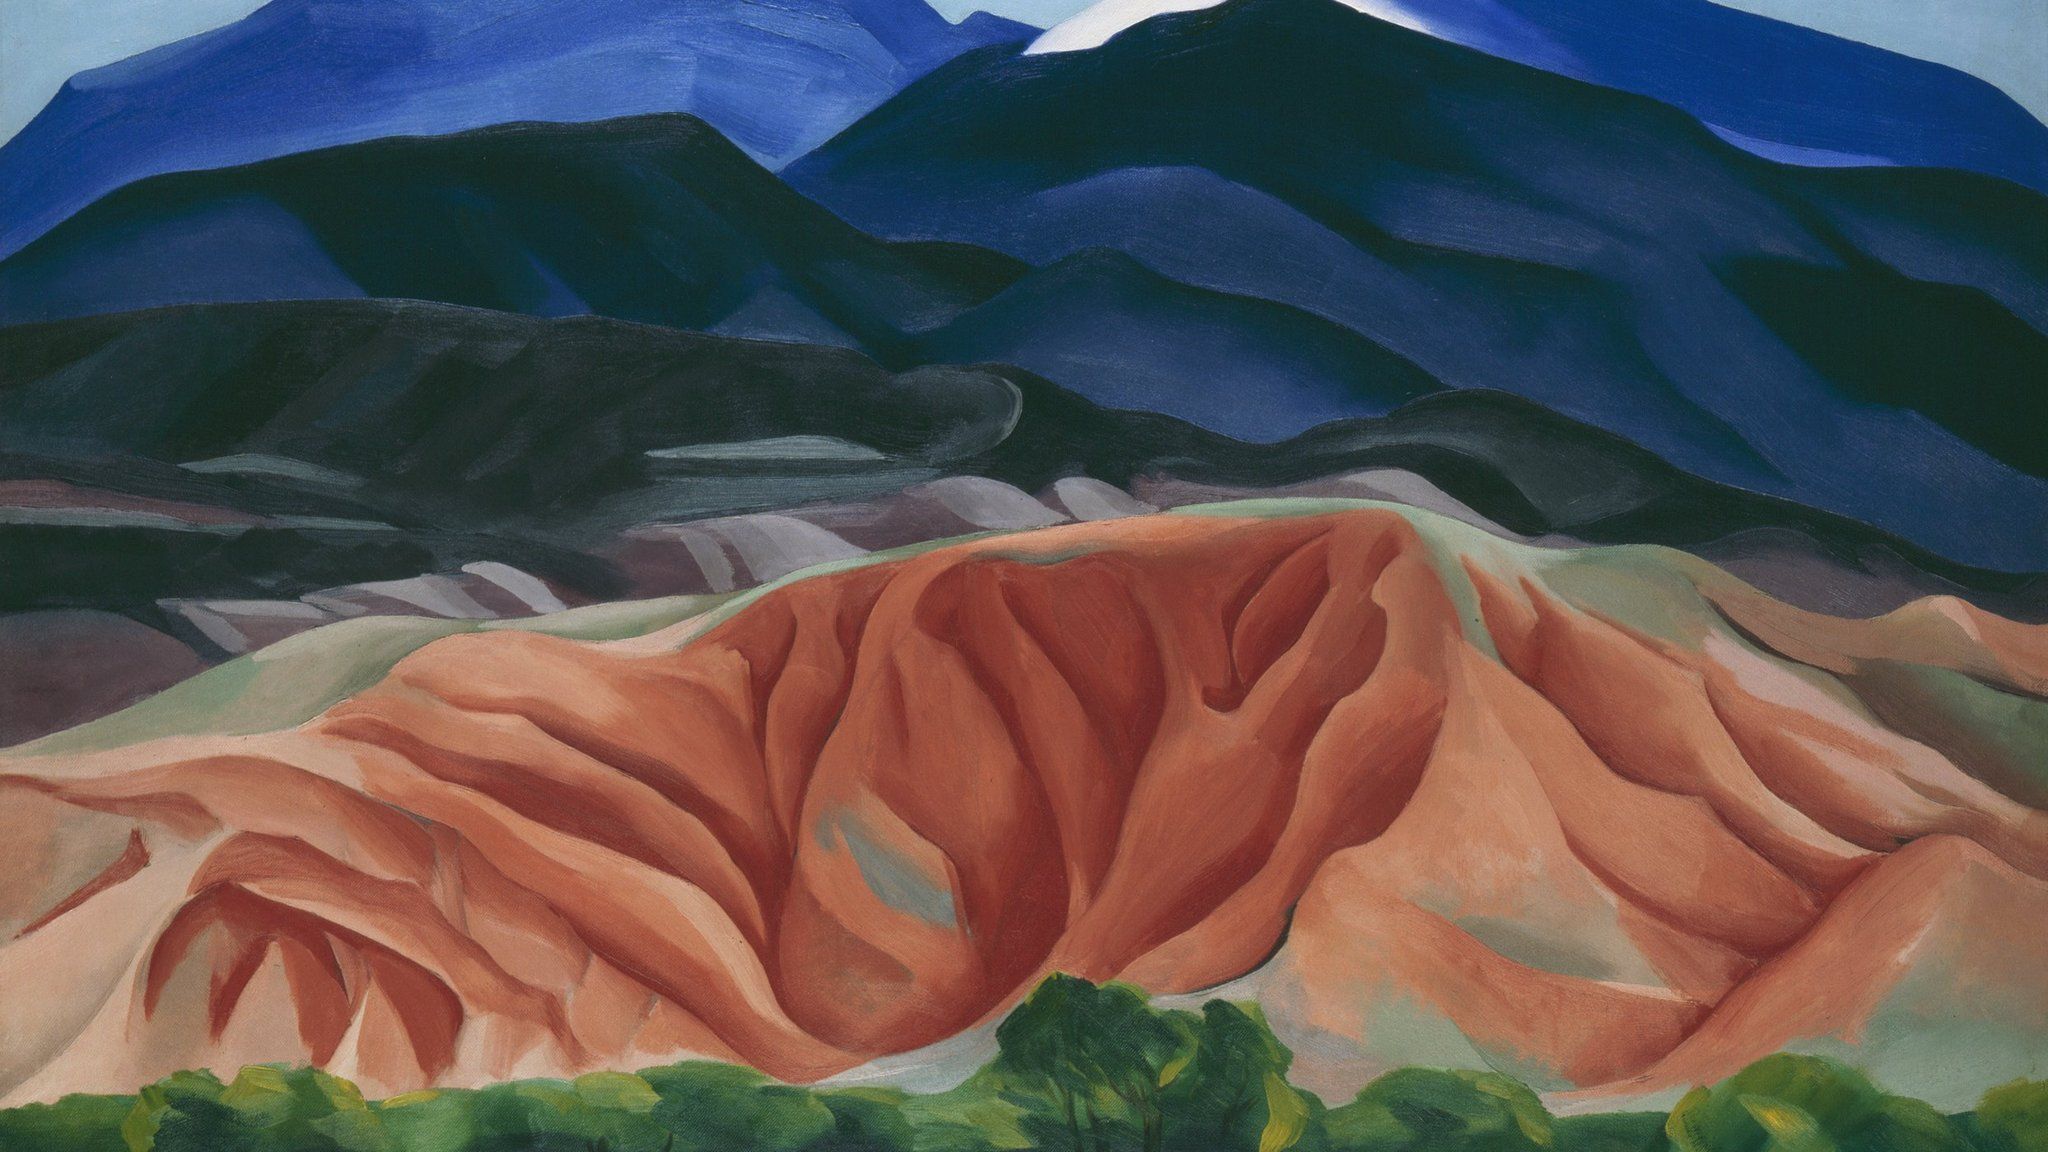 Tate Modern to host UK's biggest Georgia O'Keeffe exhibition